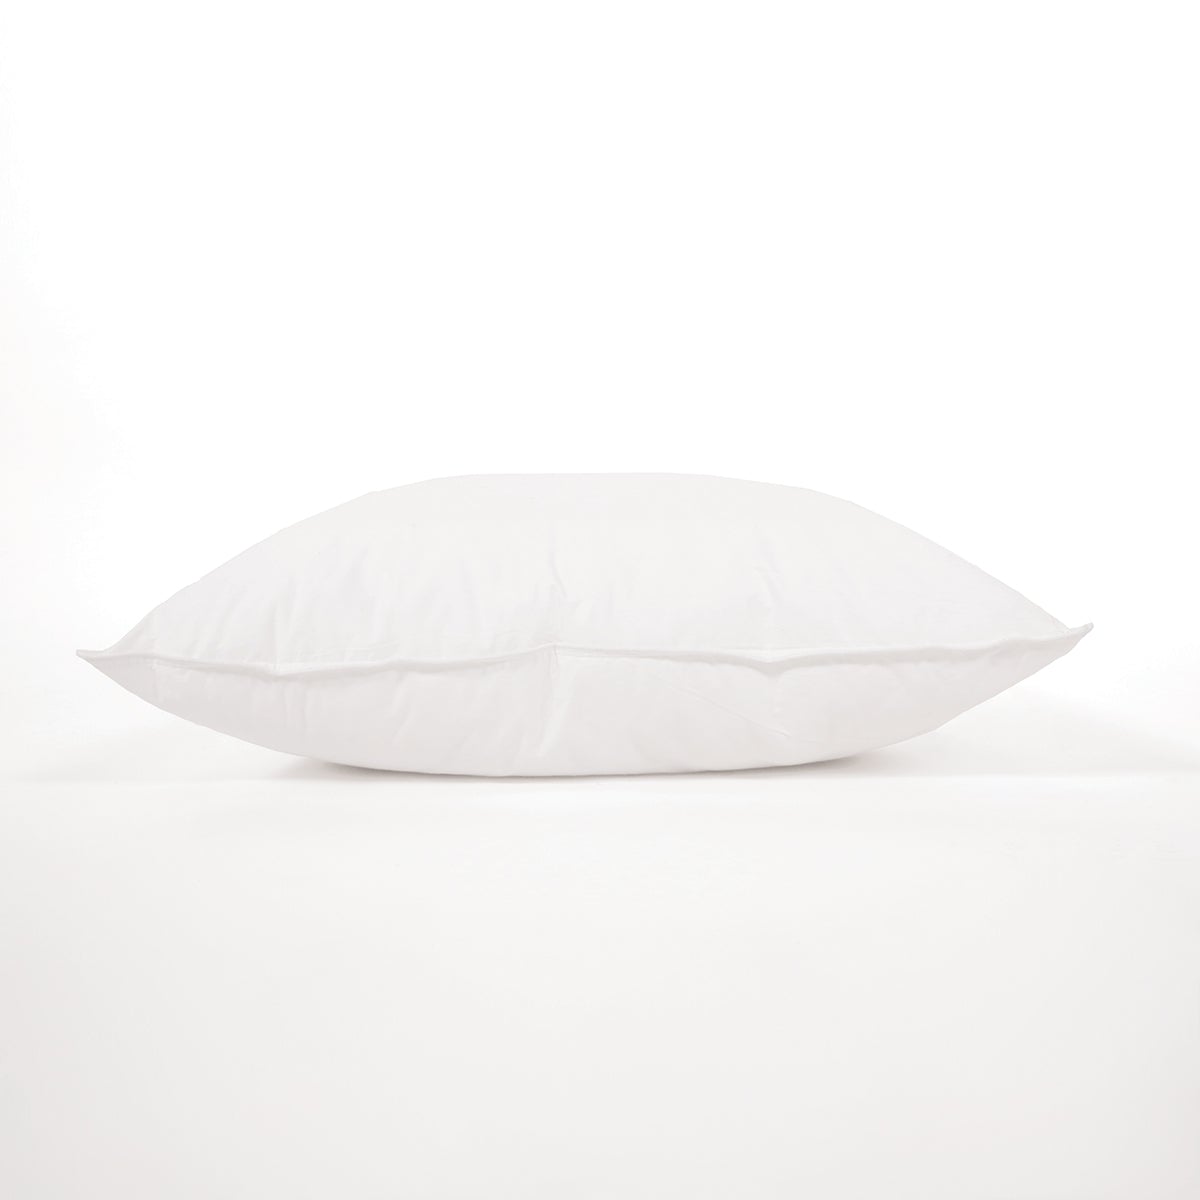 DOWN ALTERNATIVE SLEEPING PILLOW INSERTS - Pompom at Home